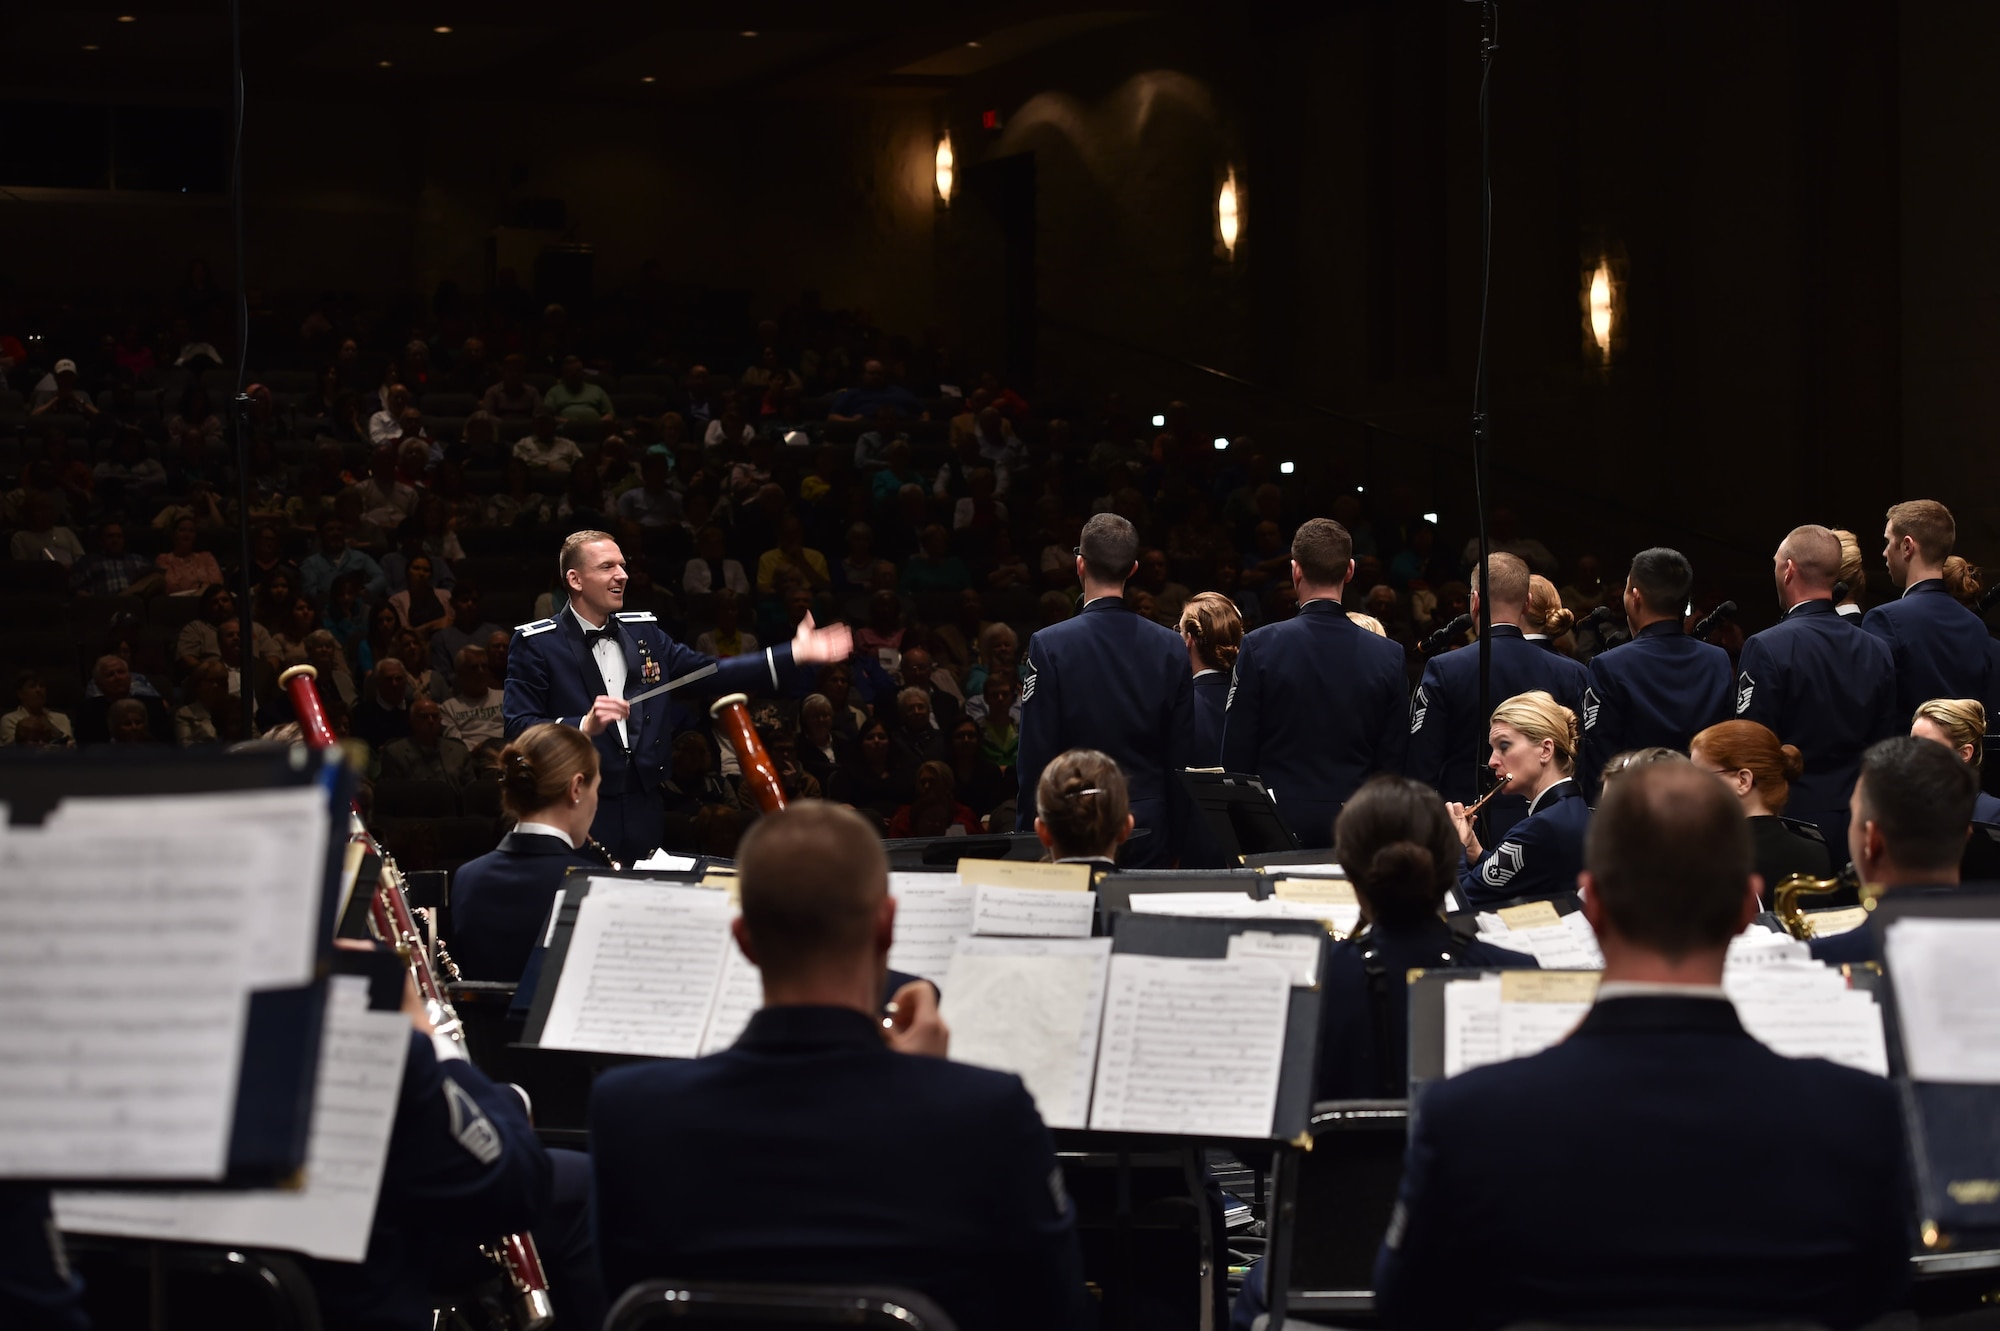 Capt. Joseph Hansen, U.S. Air Force Singing Sergeants officer in charge, conducts during a U.S. Air Force Concert Band and Singing Sergeants performance at Delta State University, in Cleveland, Miss., April 13, 2016. The bands performed across five states during a 12 day spring tour. (U.S. Air Force photo by Senior Airman Dylan Nuckolls/Released)